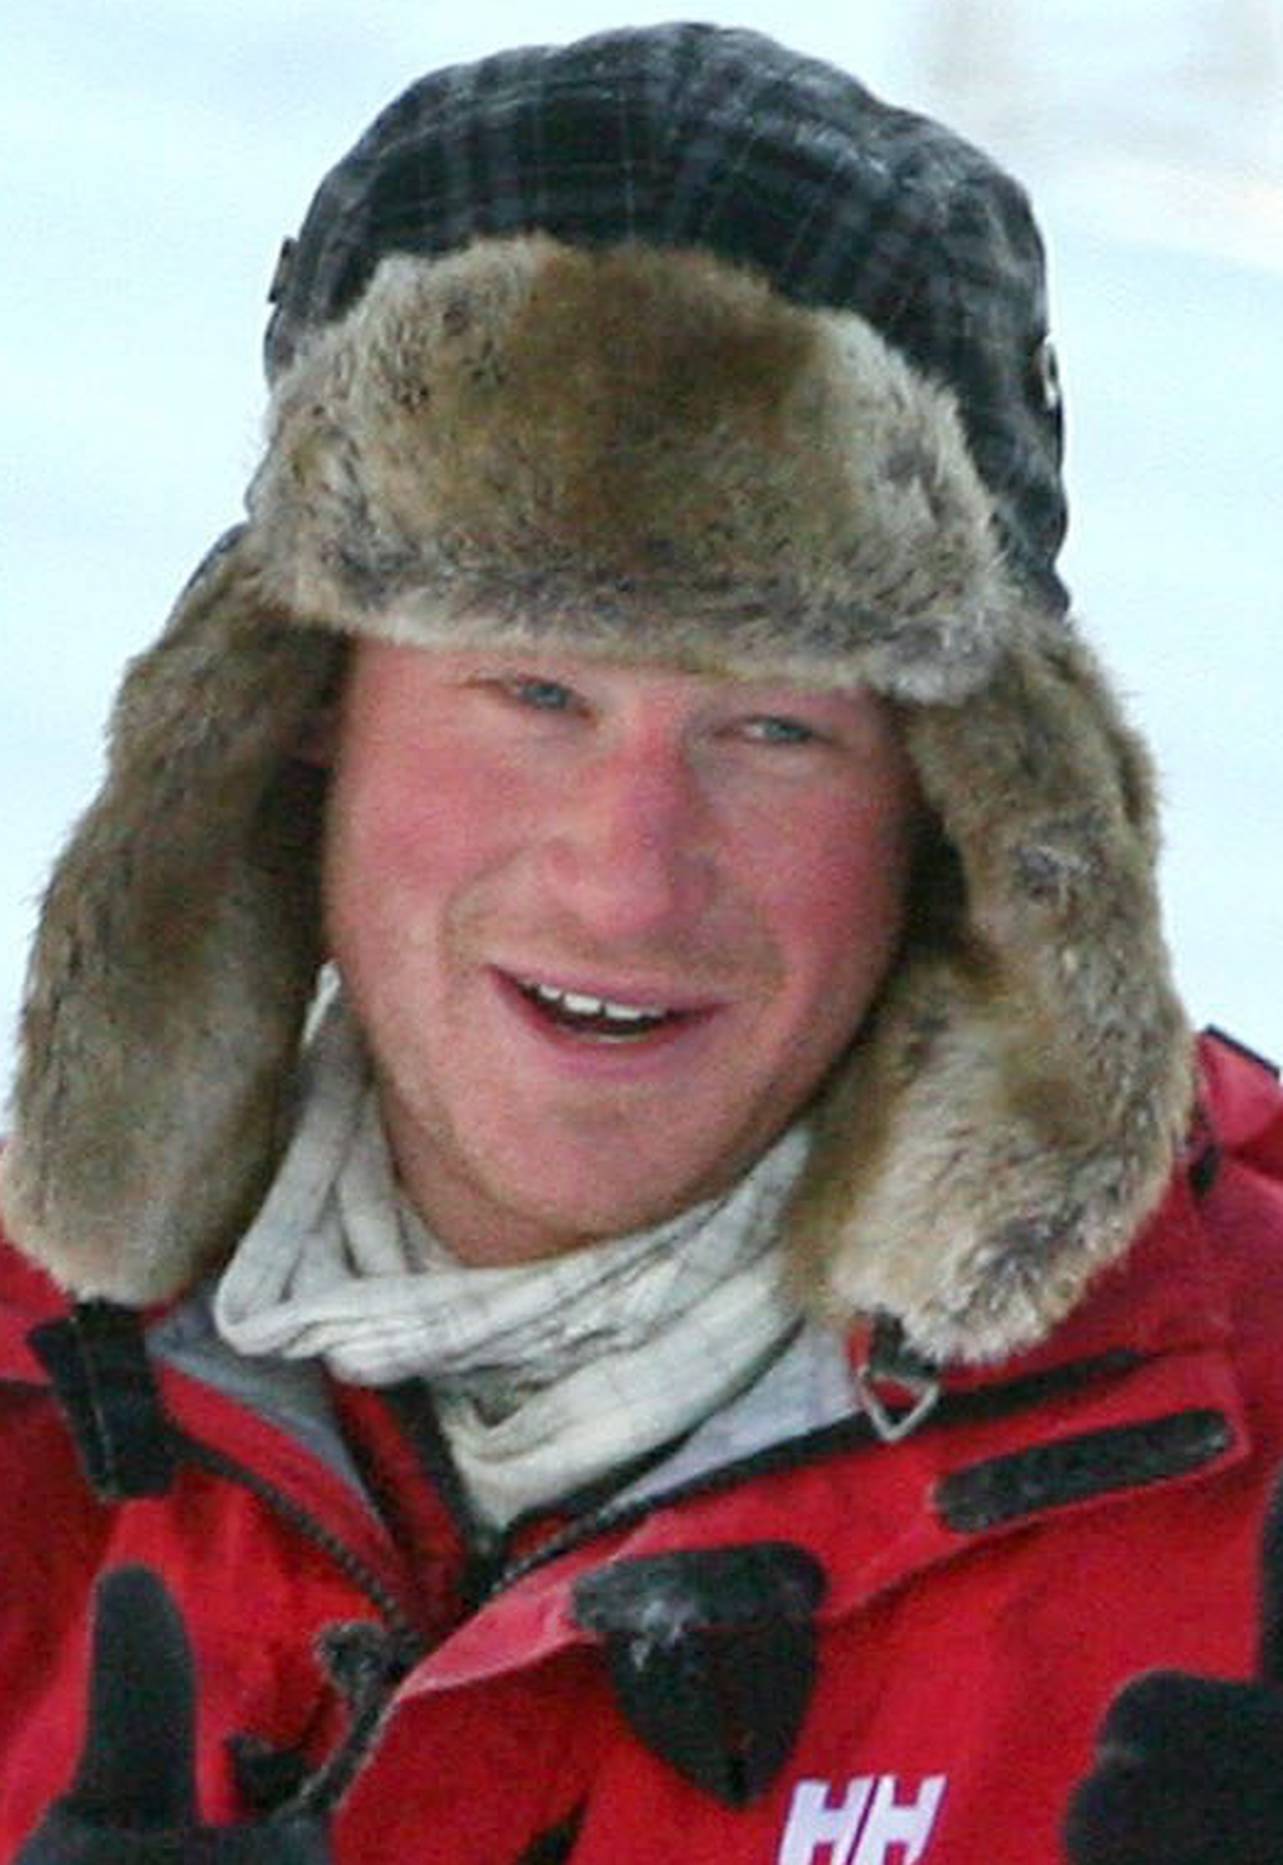 PRINCE HARRY ON THE WALKING WITH THE WOUNDED EXPEDITION